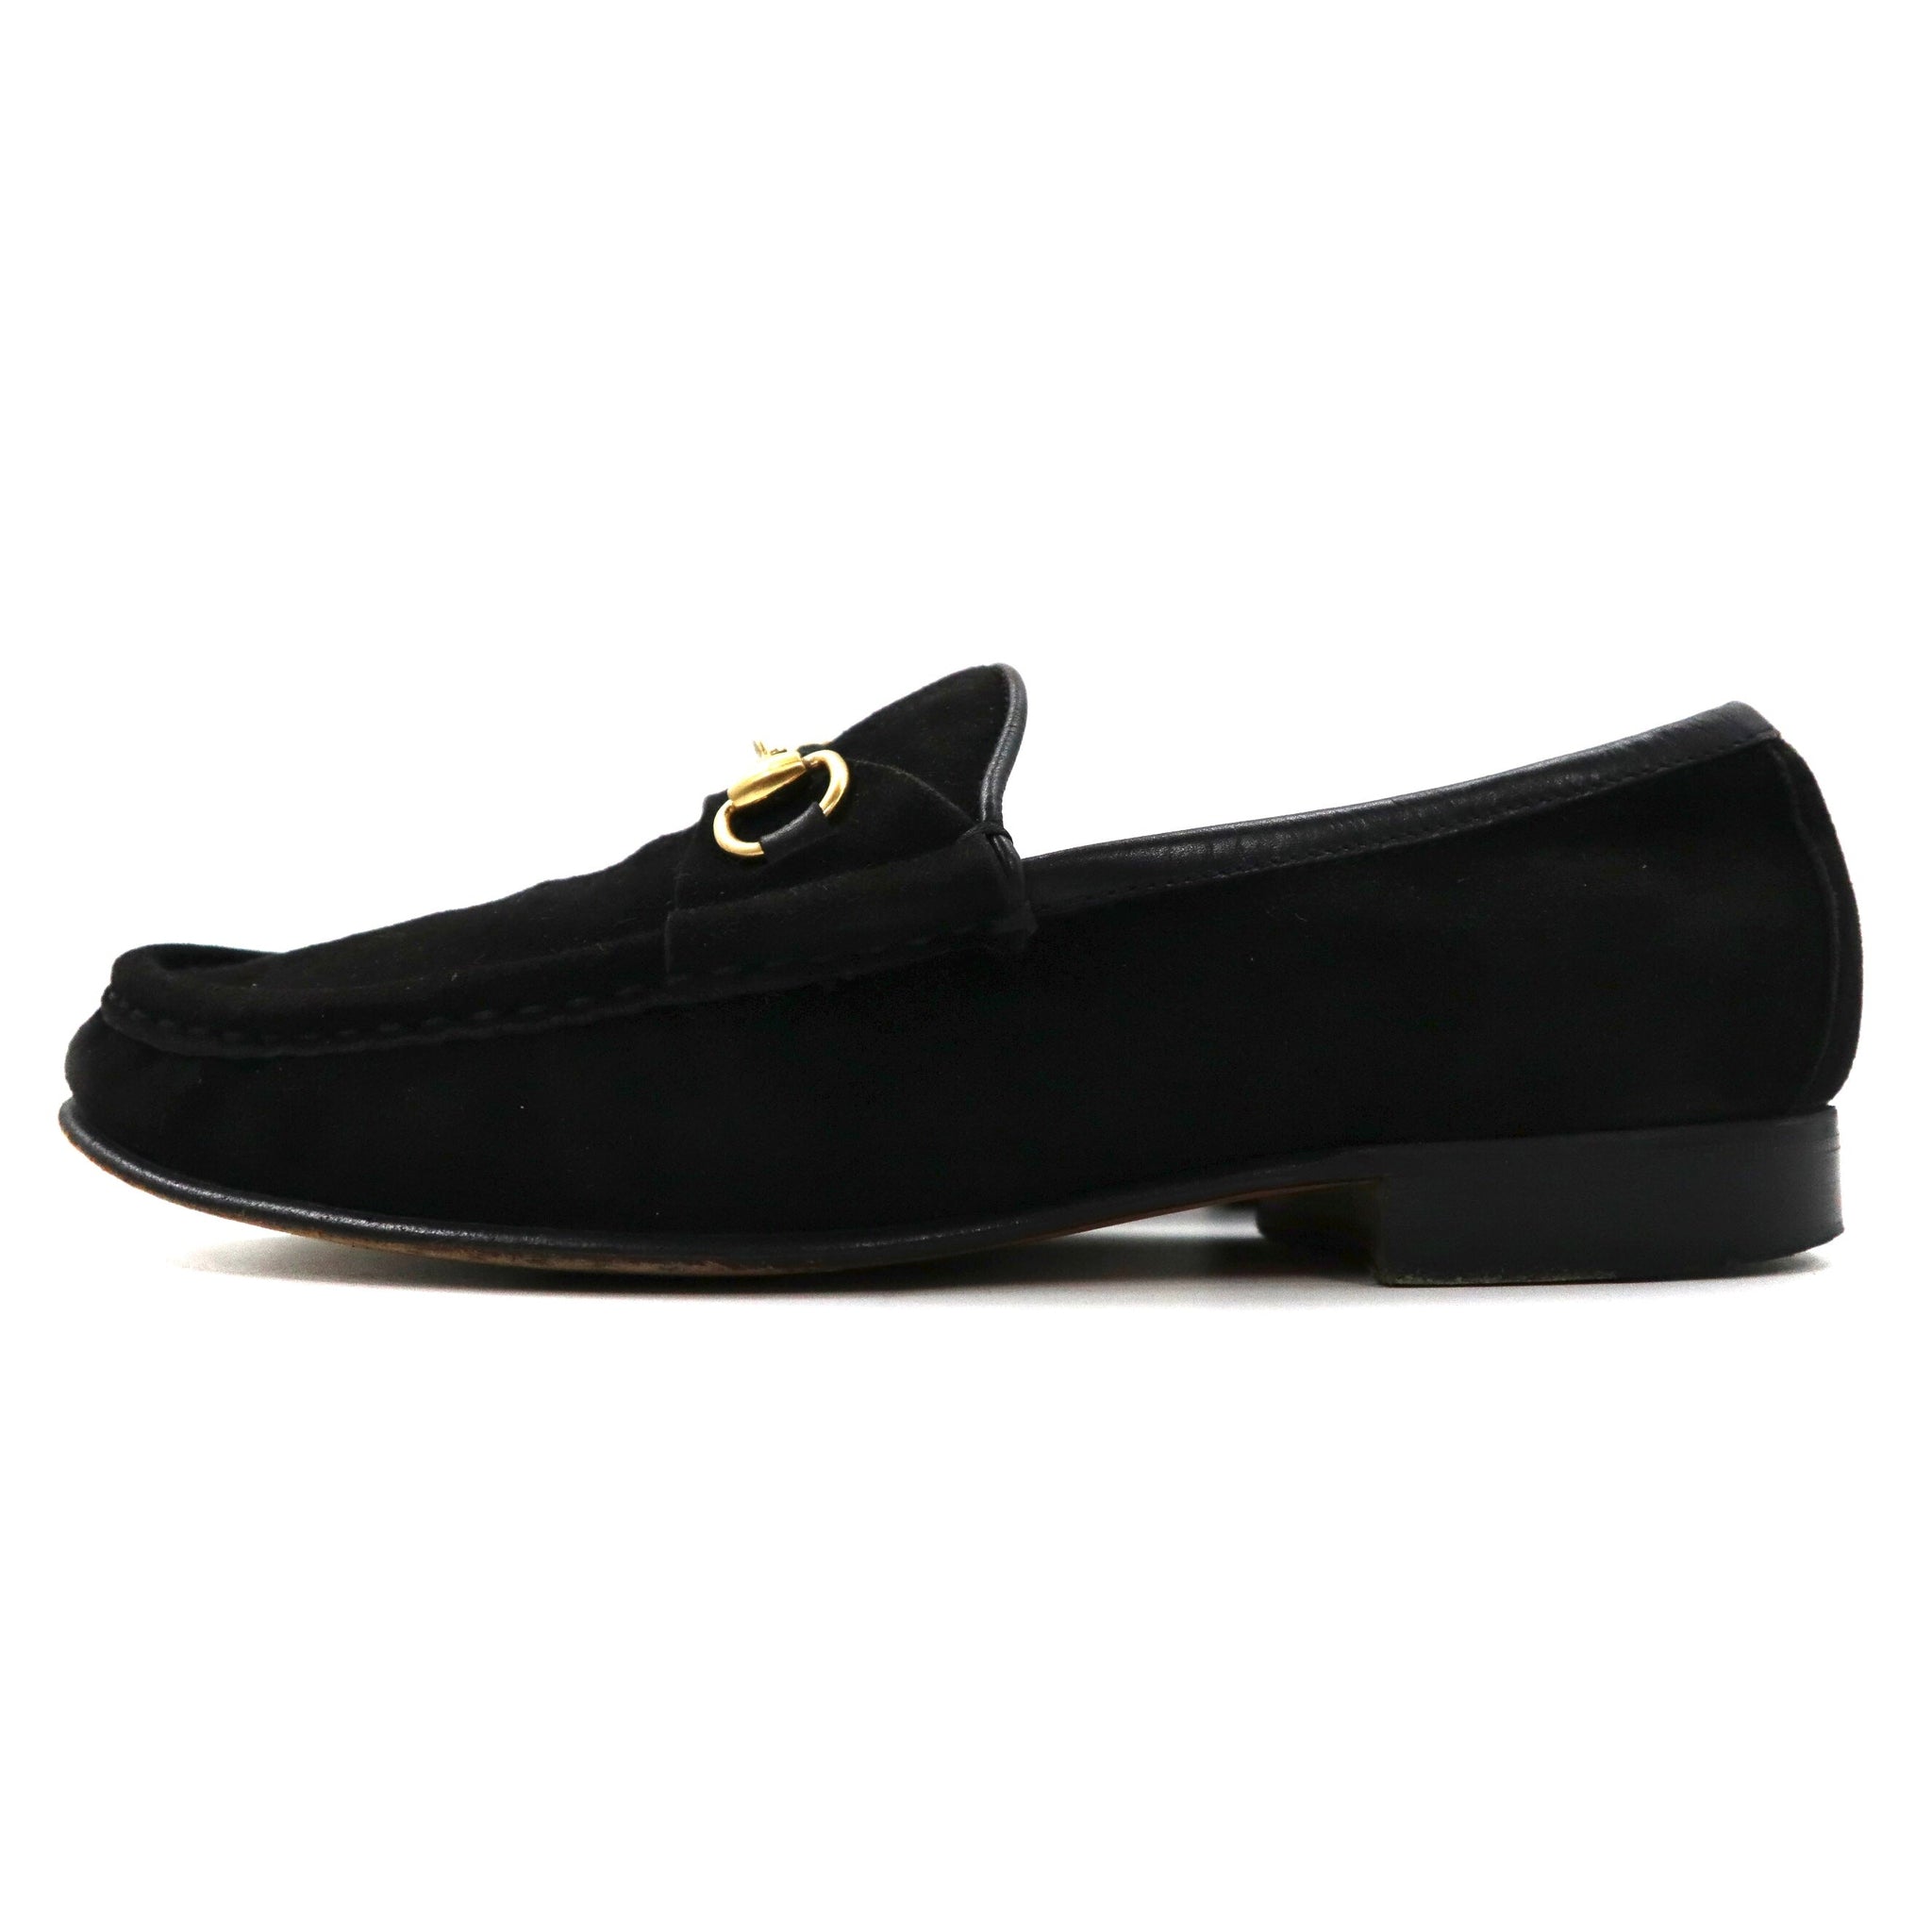 GUCCI Hose Bit LOAFERS US7 Black SUEDE Leather 100 255 1 